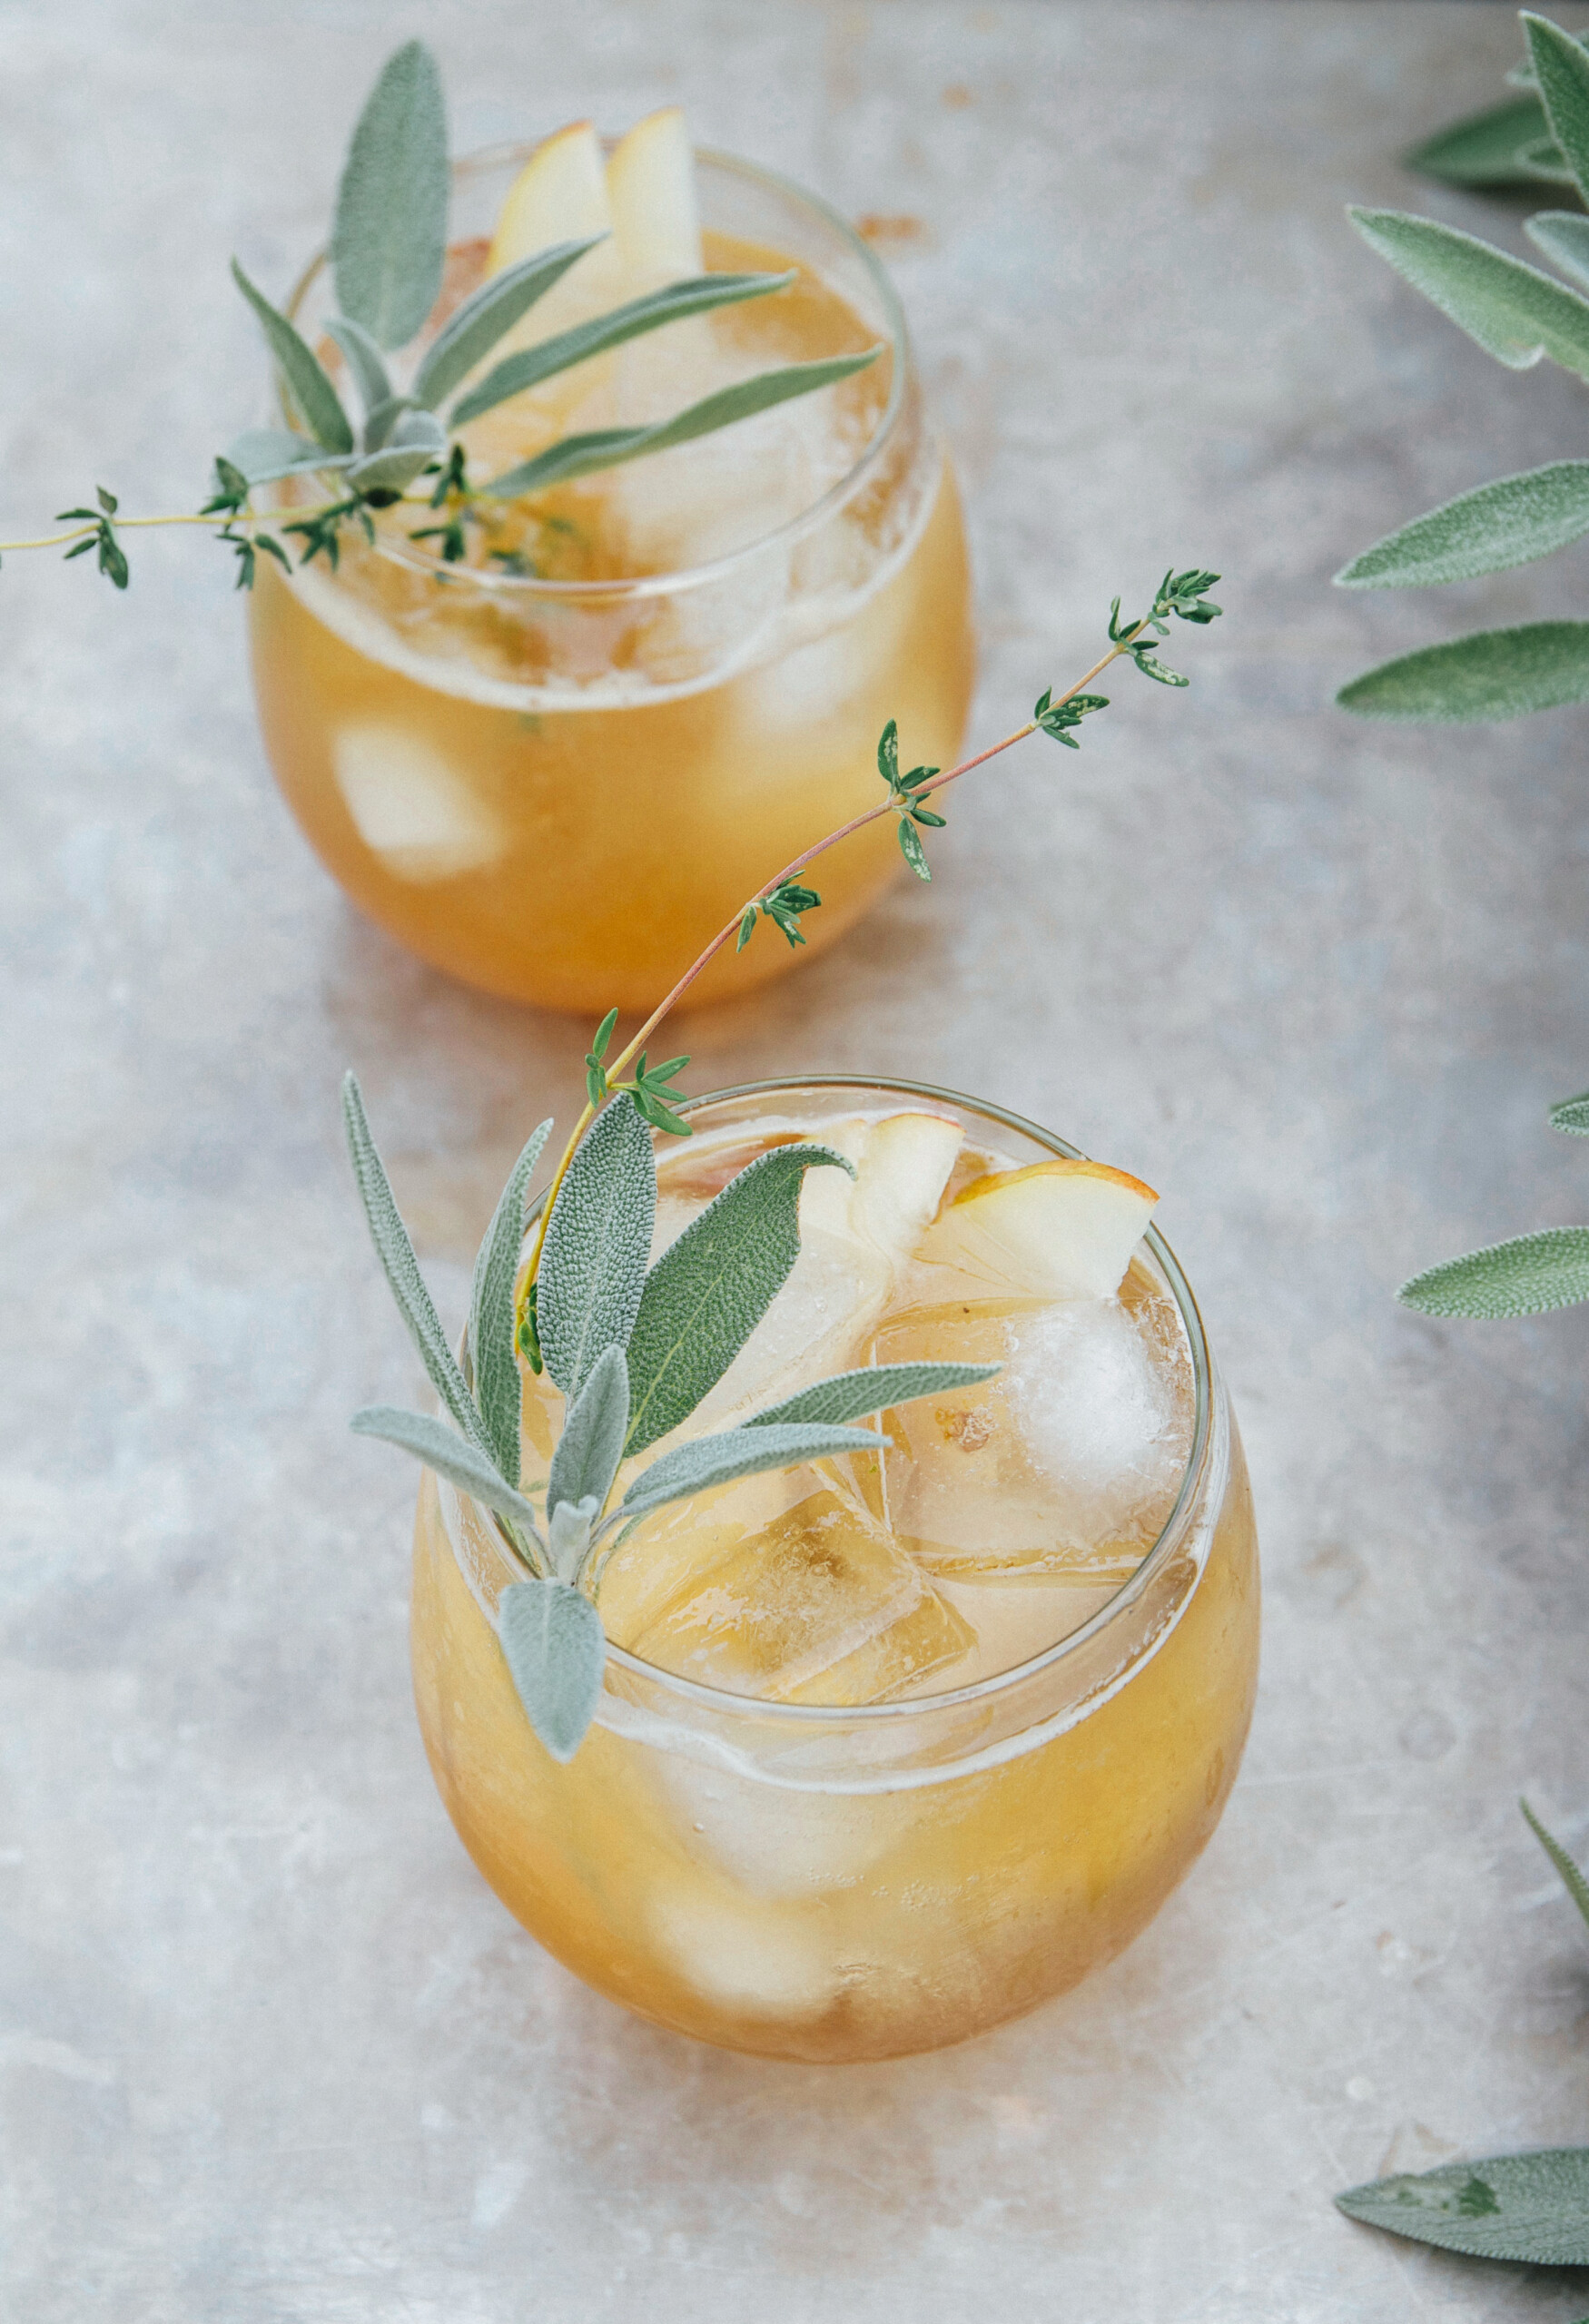 Two cocktails with pears, sage, and thyme leaves.